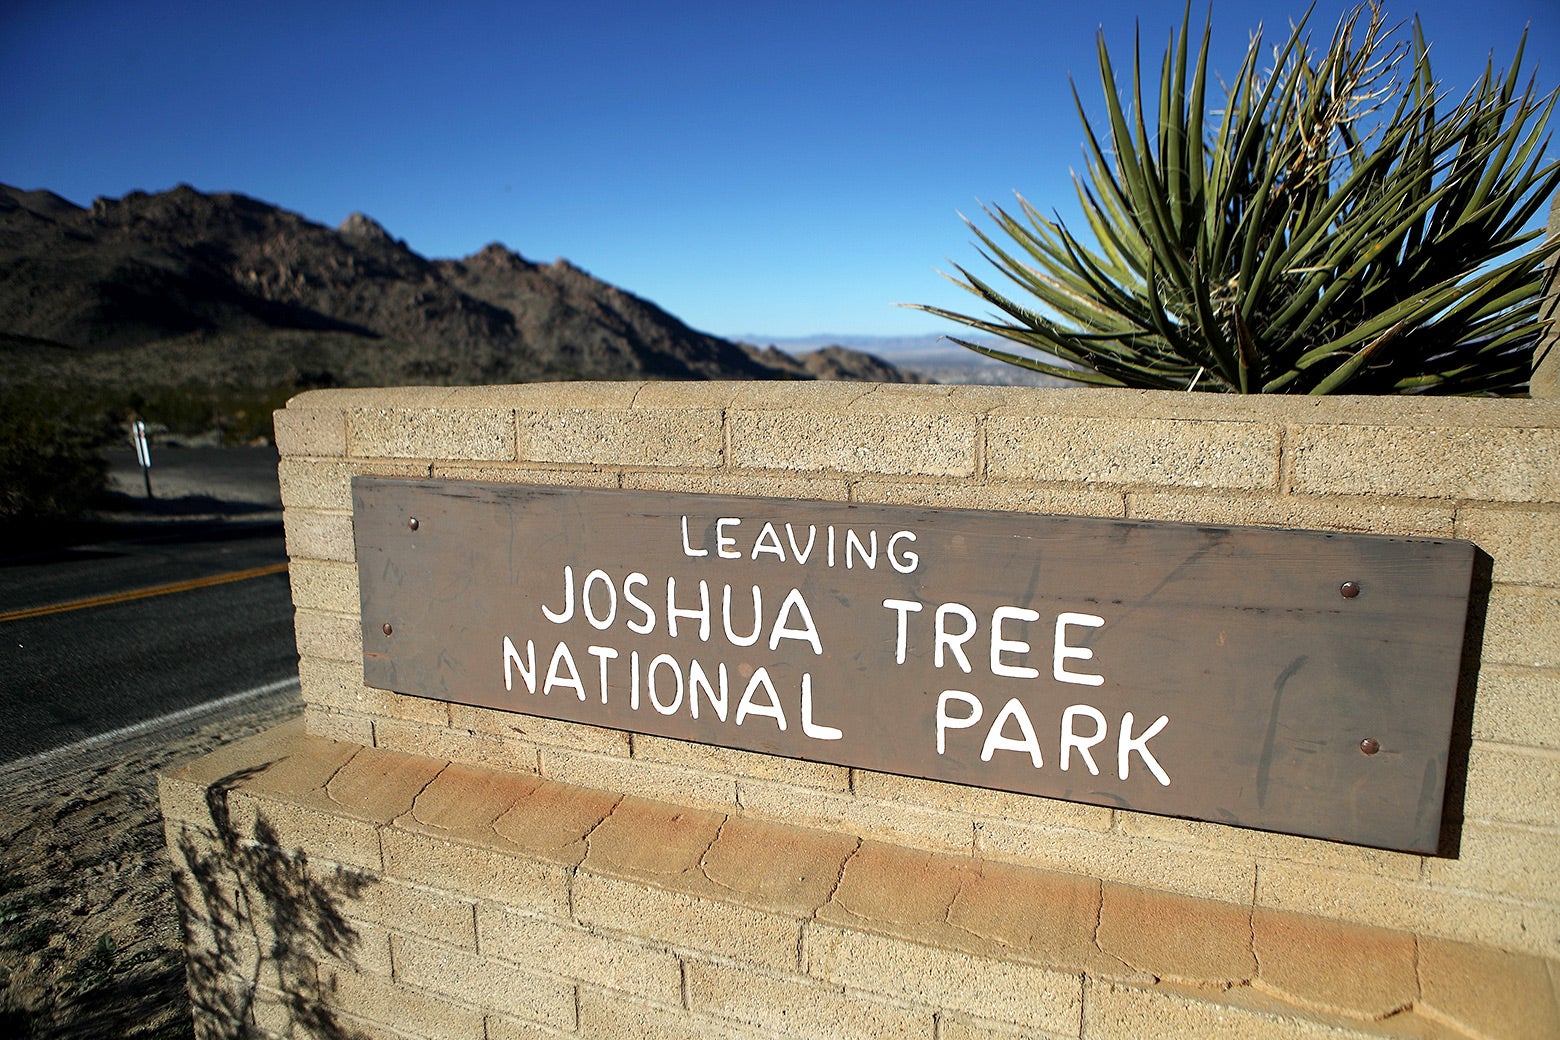 A sign depicting "Leaving Joshua Tree National Park" as seen on Jan. 4 in California.